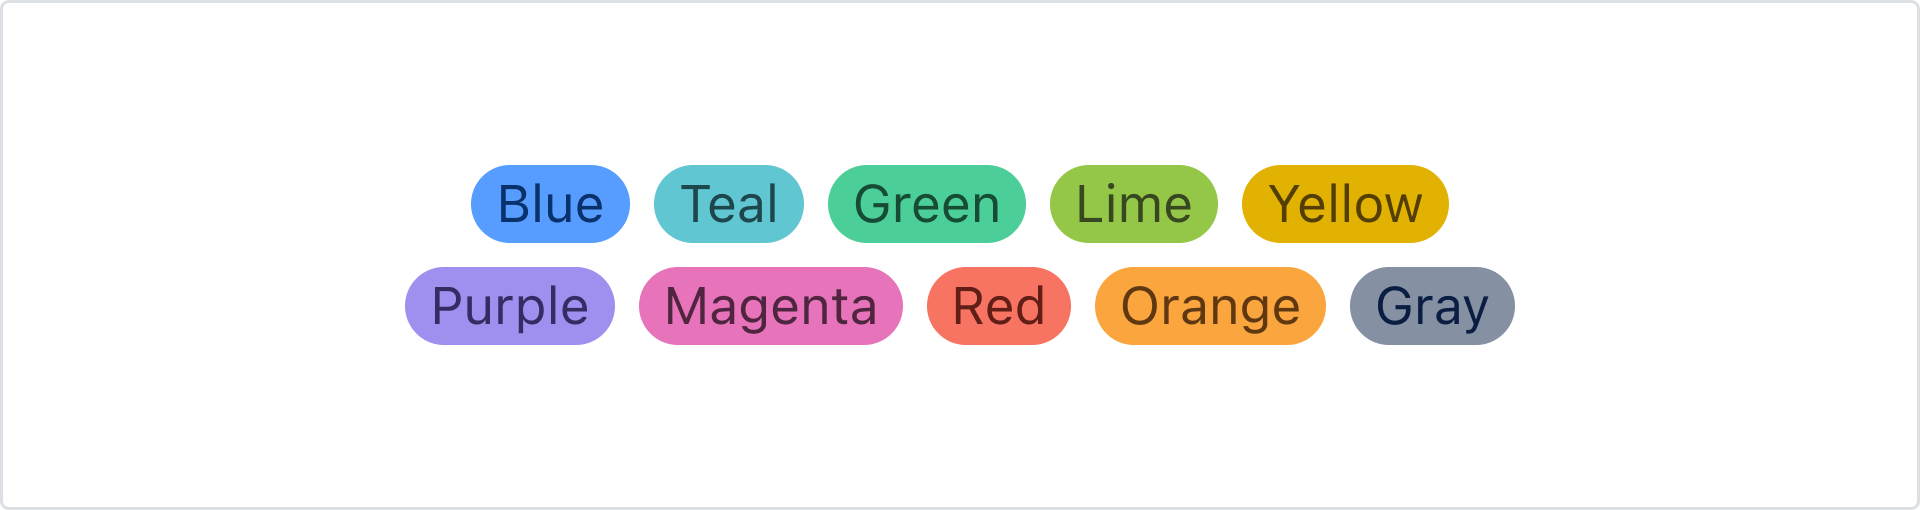 Tags shown in the 10 accent colors.